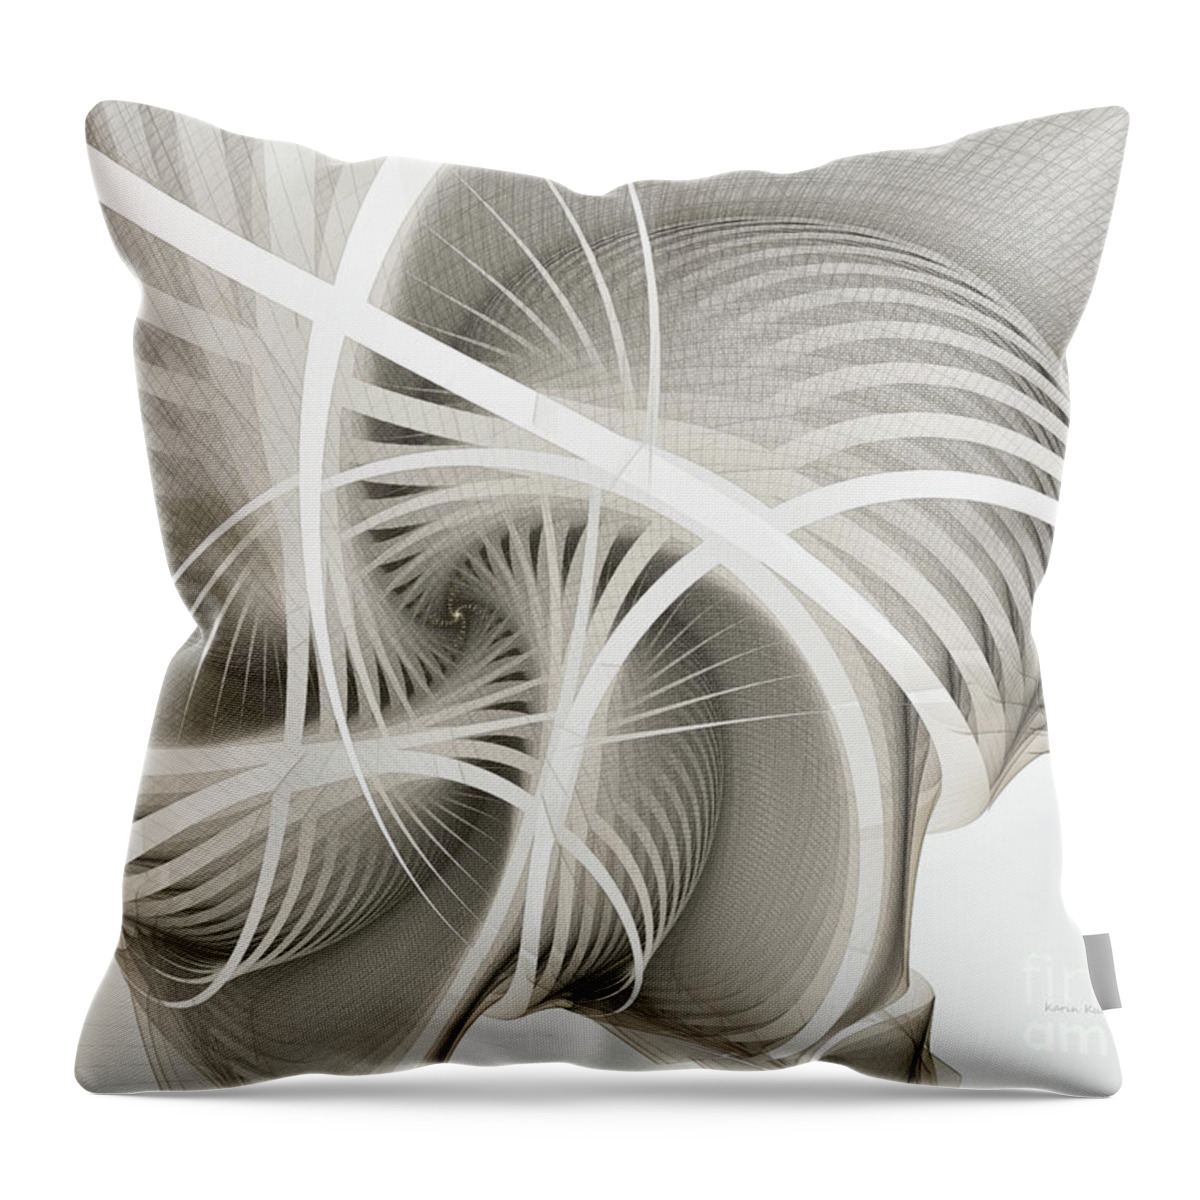 Fractal Throw Pillow featuring the digital art White Ribbons Spiral by Karin Kuhlmann